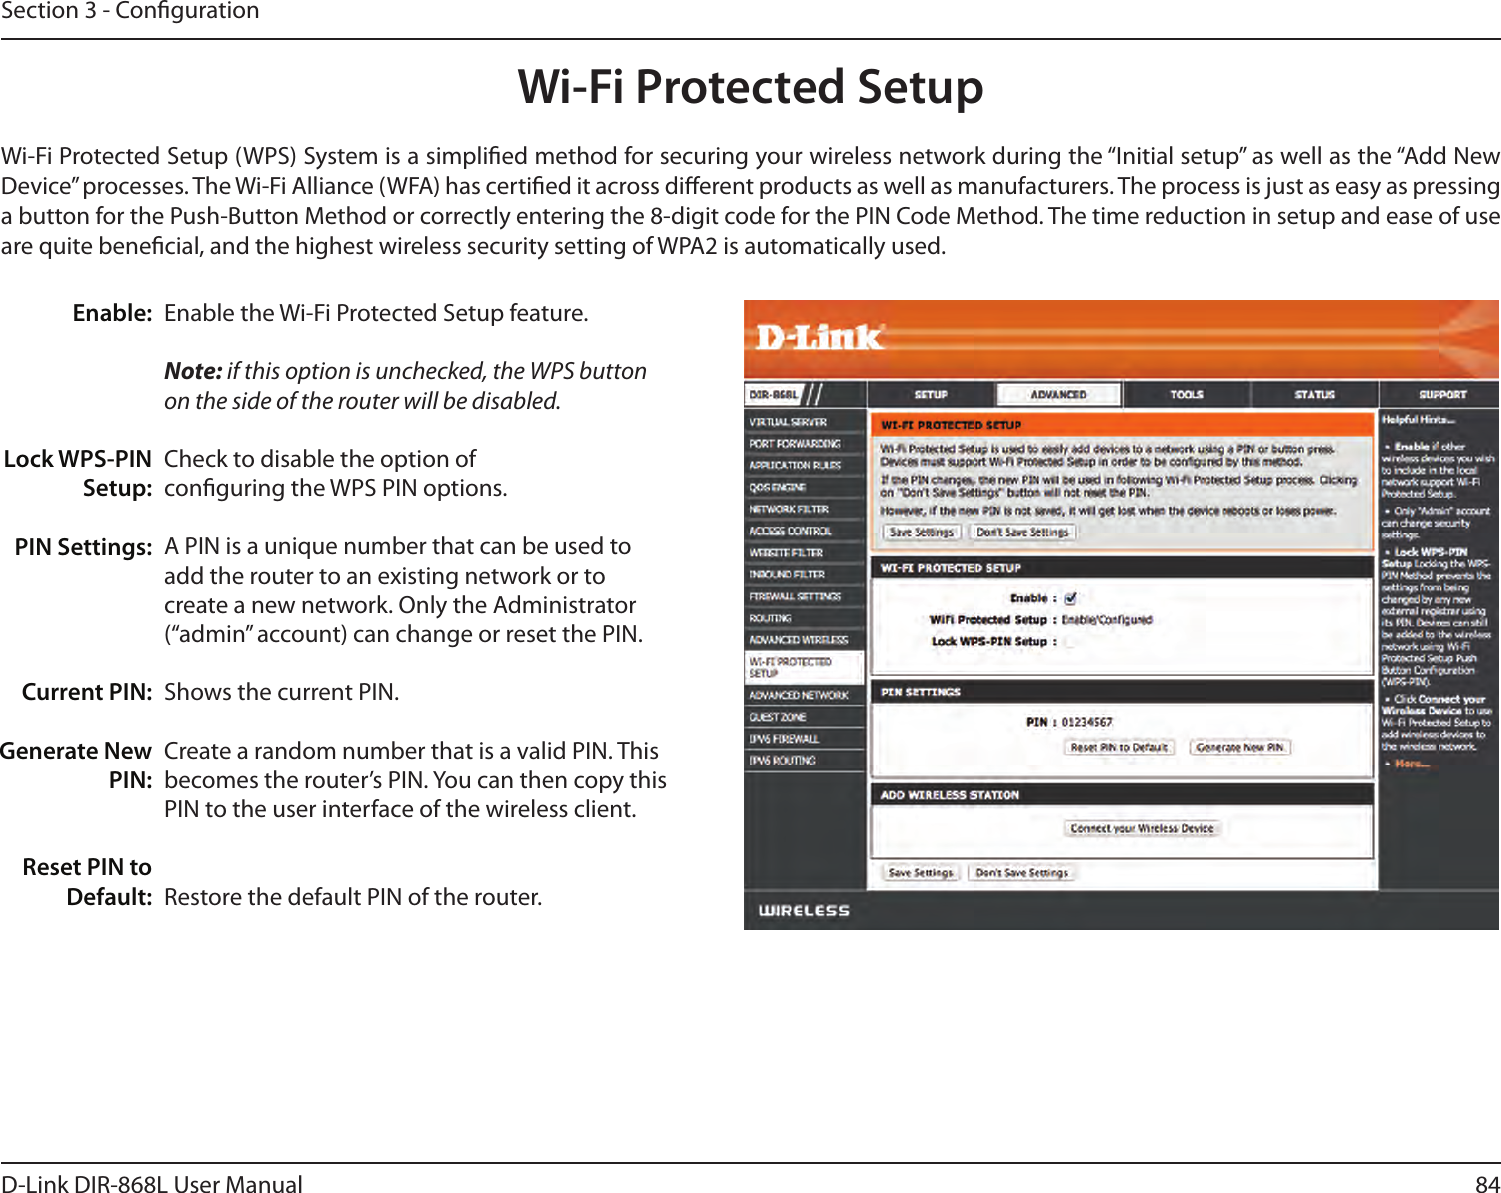 84D-Link DIR-868L User ManualSection 3 - CongurationWi-Fi Protected SetupEnable the Wi-Fi Protected Setup feature. Note: if this option is unchecked, the WPS button on the side of the router will be disabled.Check to disable the option of conguring the WPS PIN options.A PIN is a unique number that can be used to add the router to an existing network or to create a new network. Only the Administrator (“admin” account) can change or reset the PIN. Shows the current PIN. Create a random number that is a valid PIN. This becomes the router’s PIN. You can then copy this PIN to the user interface of the wireless client.Restore the default PIN of the router. Enable:Lock WPS-PIN Setup:PIN Settings:Current PIN:Generate New PIN:Reset PIN to Default:Wi-Fi Protected Setup (WPS) System is a simplied method for securing your wireless network during the “Initial setup” as well as the “Add New Device” processes. The Wi-Fi Alliance (WFA) has certied it across dierent products as well as manufacturers. The process is just as easy as pressing a button for the Push-Button Method or correctly entering the 8-digit code for the PIN Code Method. The time reduction in setup and ease of use are quite benecial, and the highest wireless security setting of WPA2 is automatically used.